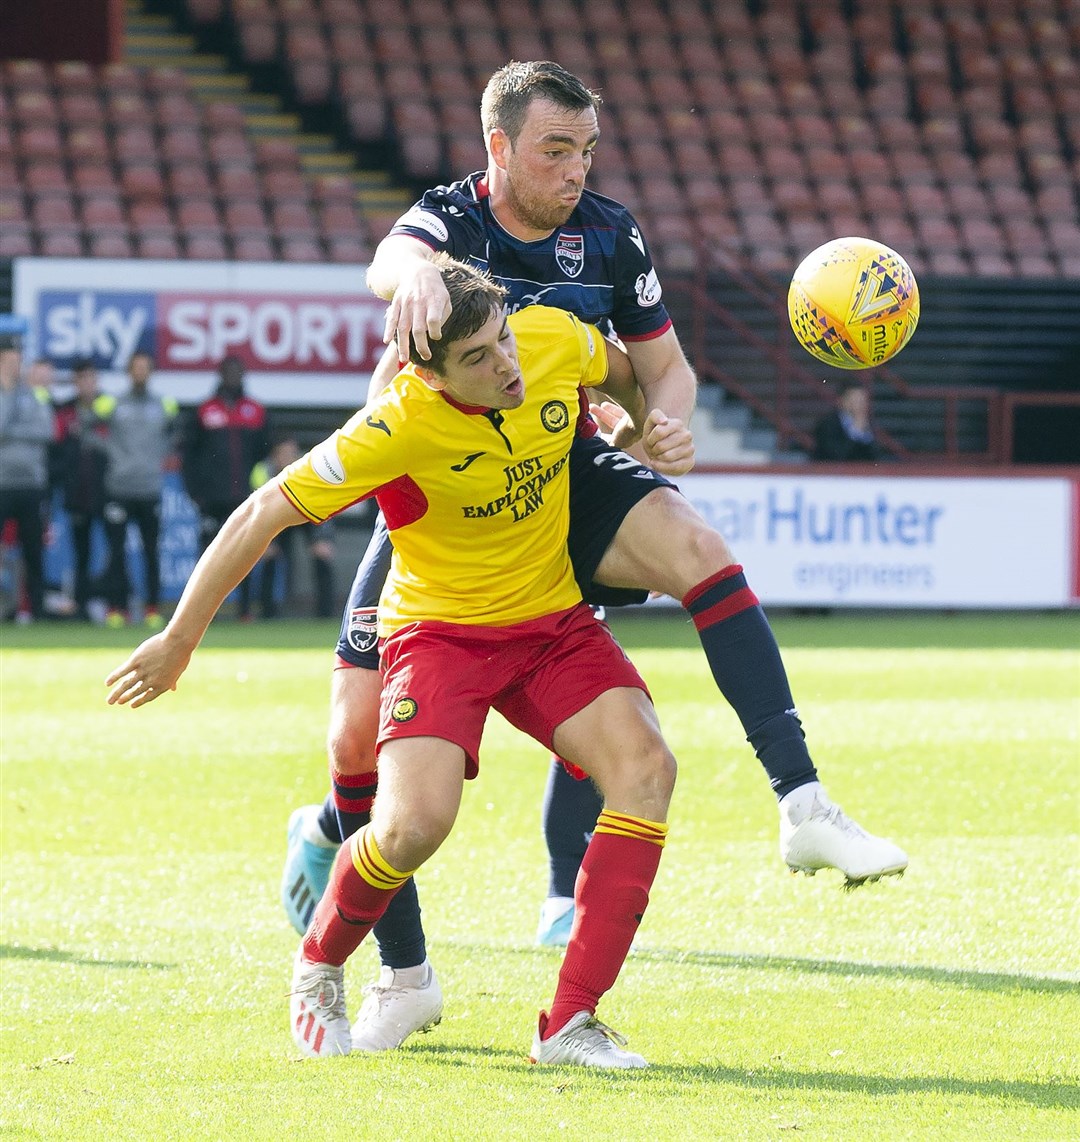 After missing part of the campaign through injury, Sean Kelly has not tasted victory with Ross County's first team since the opening league game of the season against Hamilton. Picture: Ken Macpherson